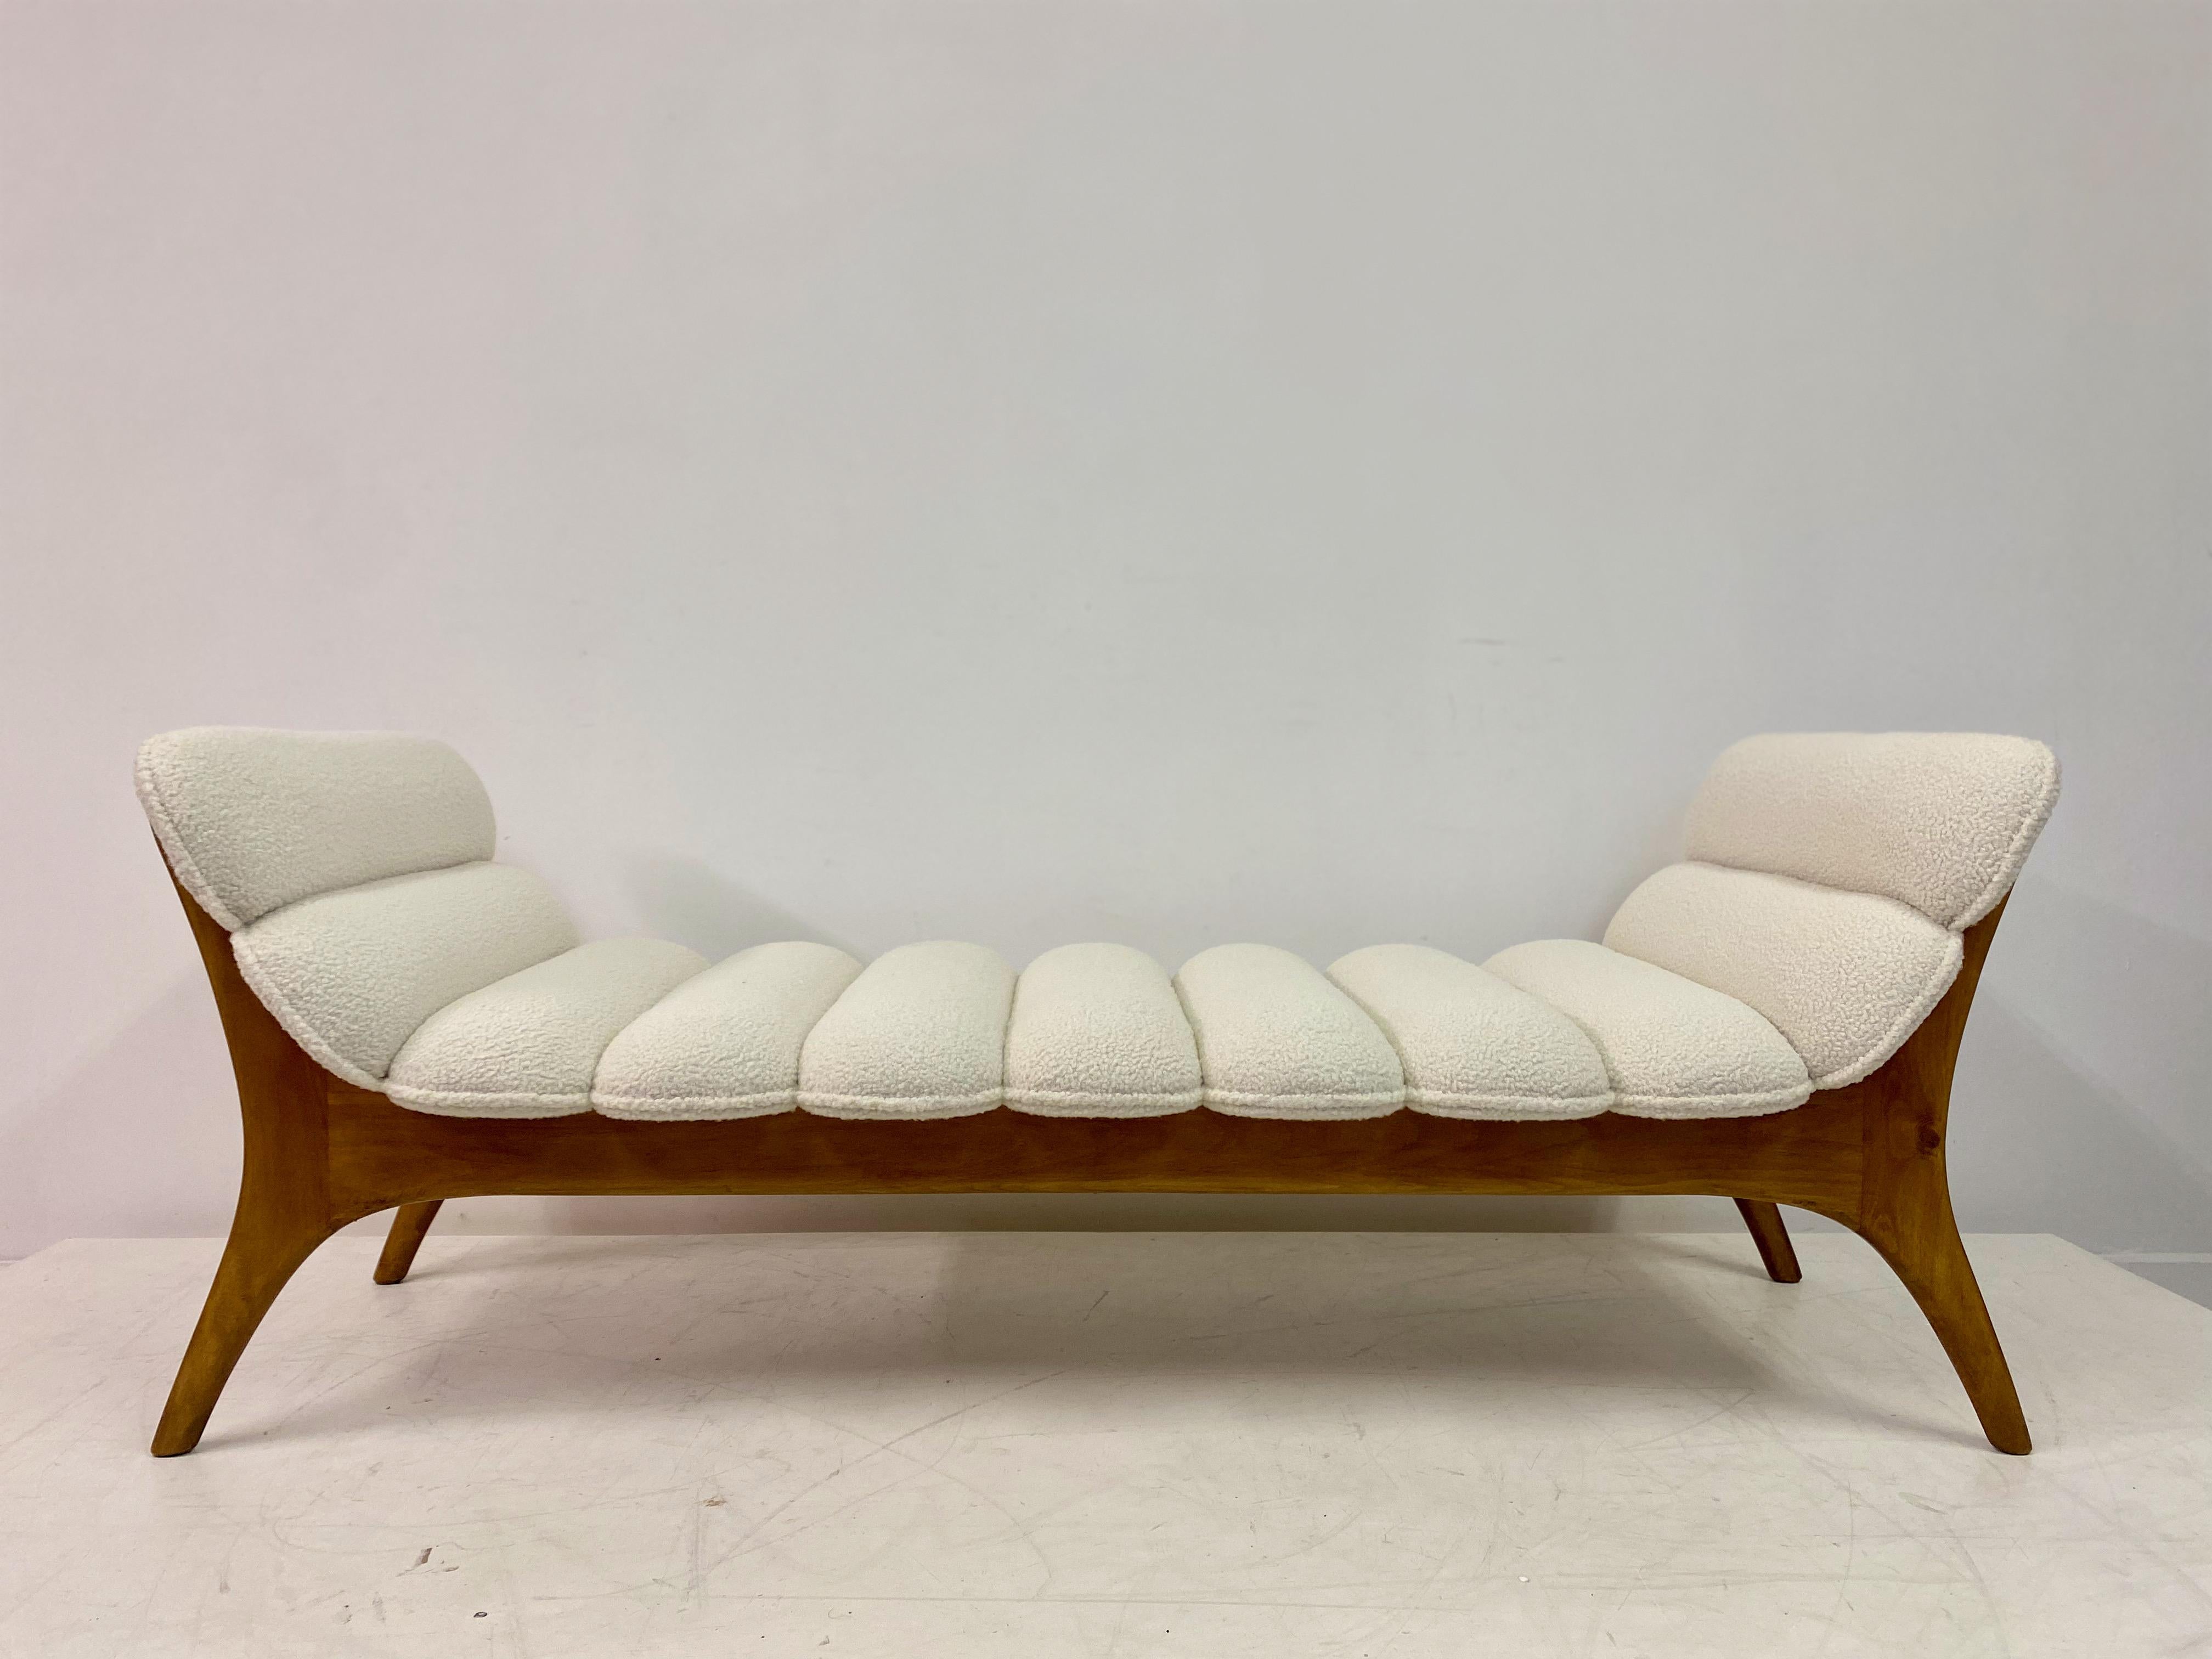 Daybed

Beech frame

Pillow seat in boucle

Italy Contemporary.